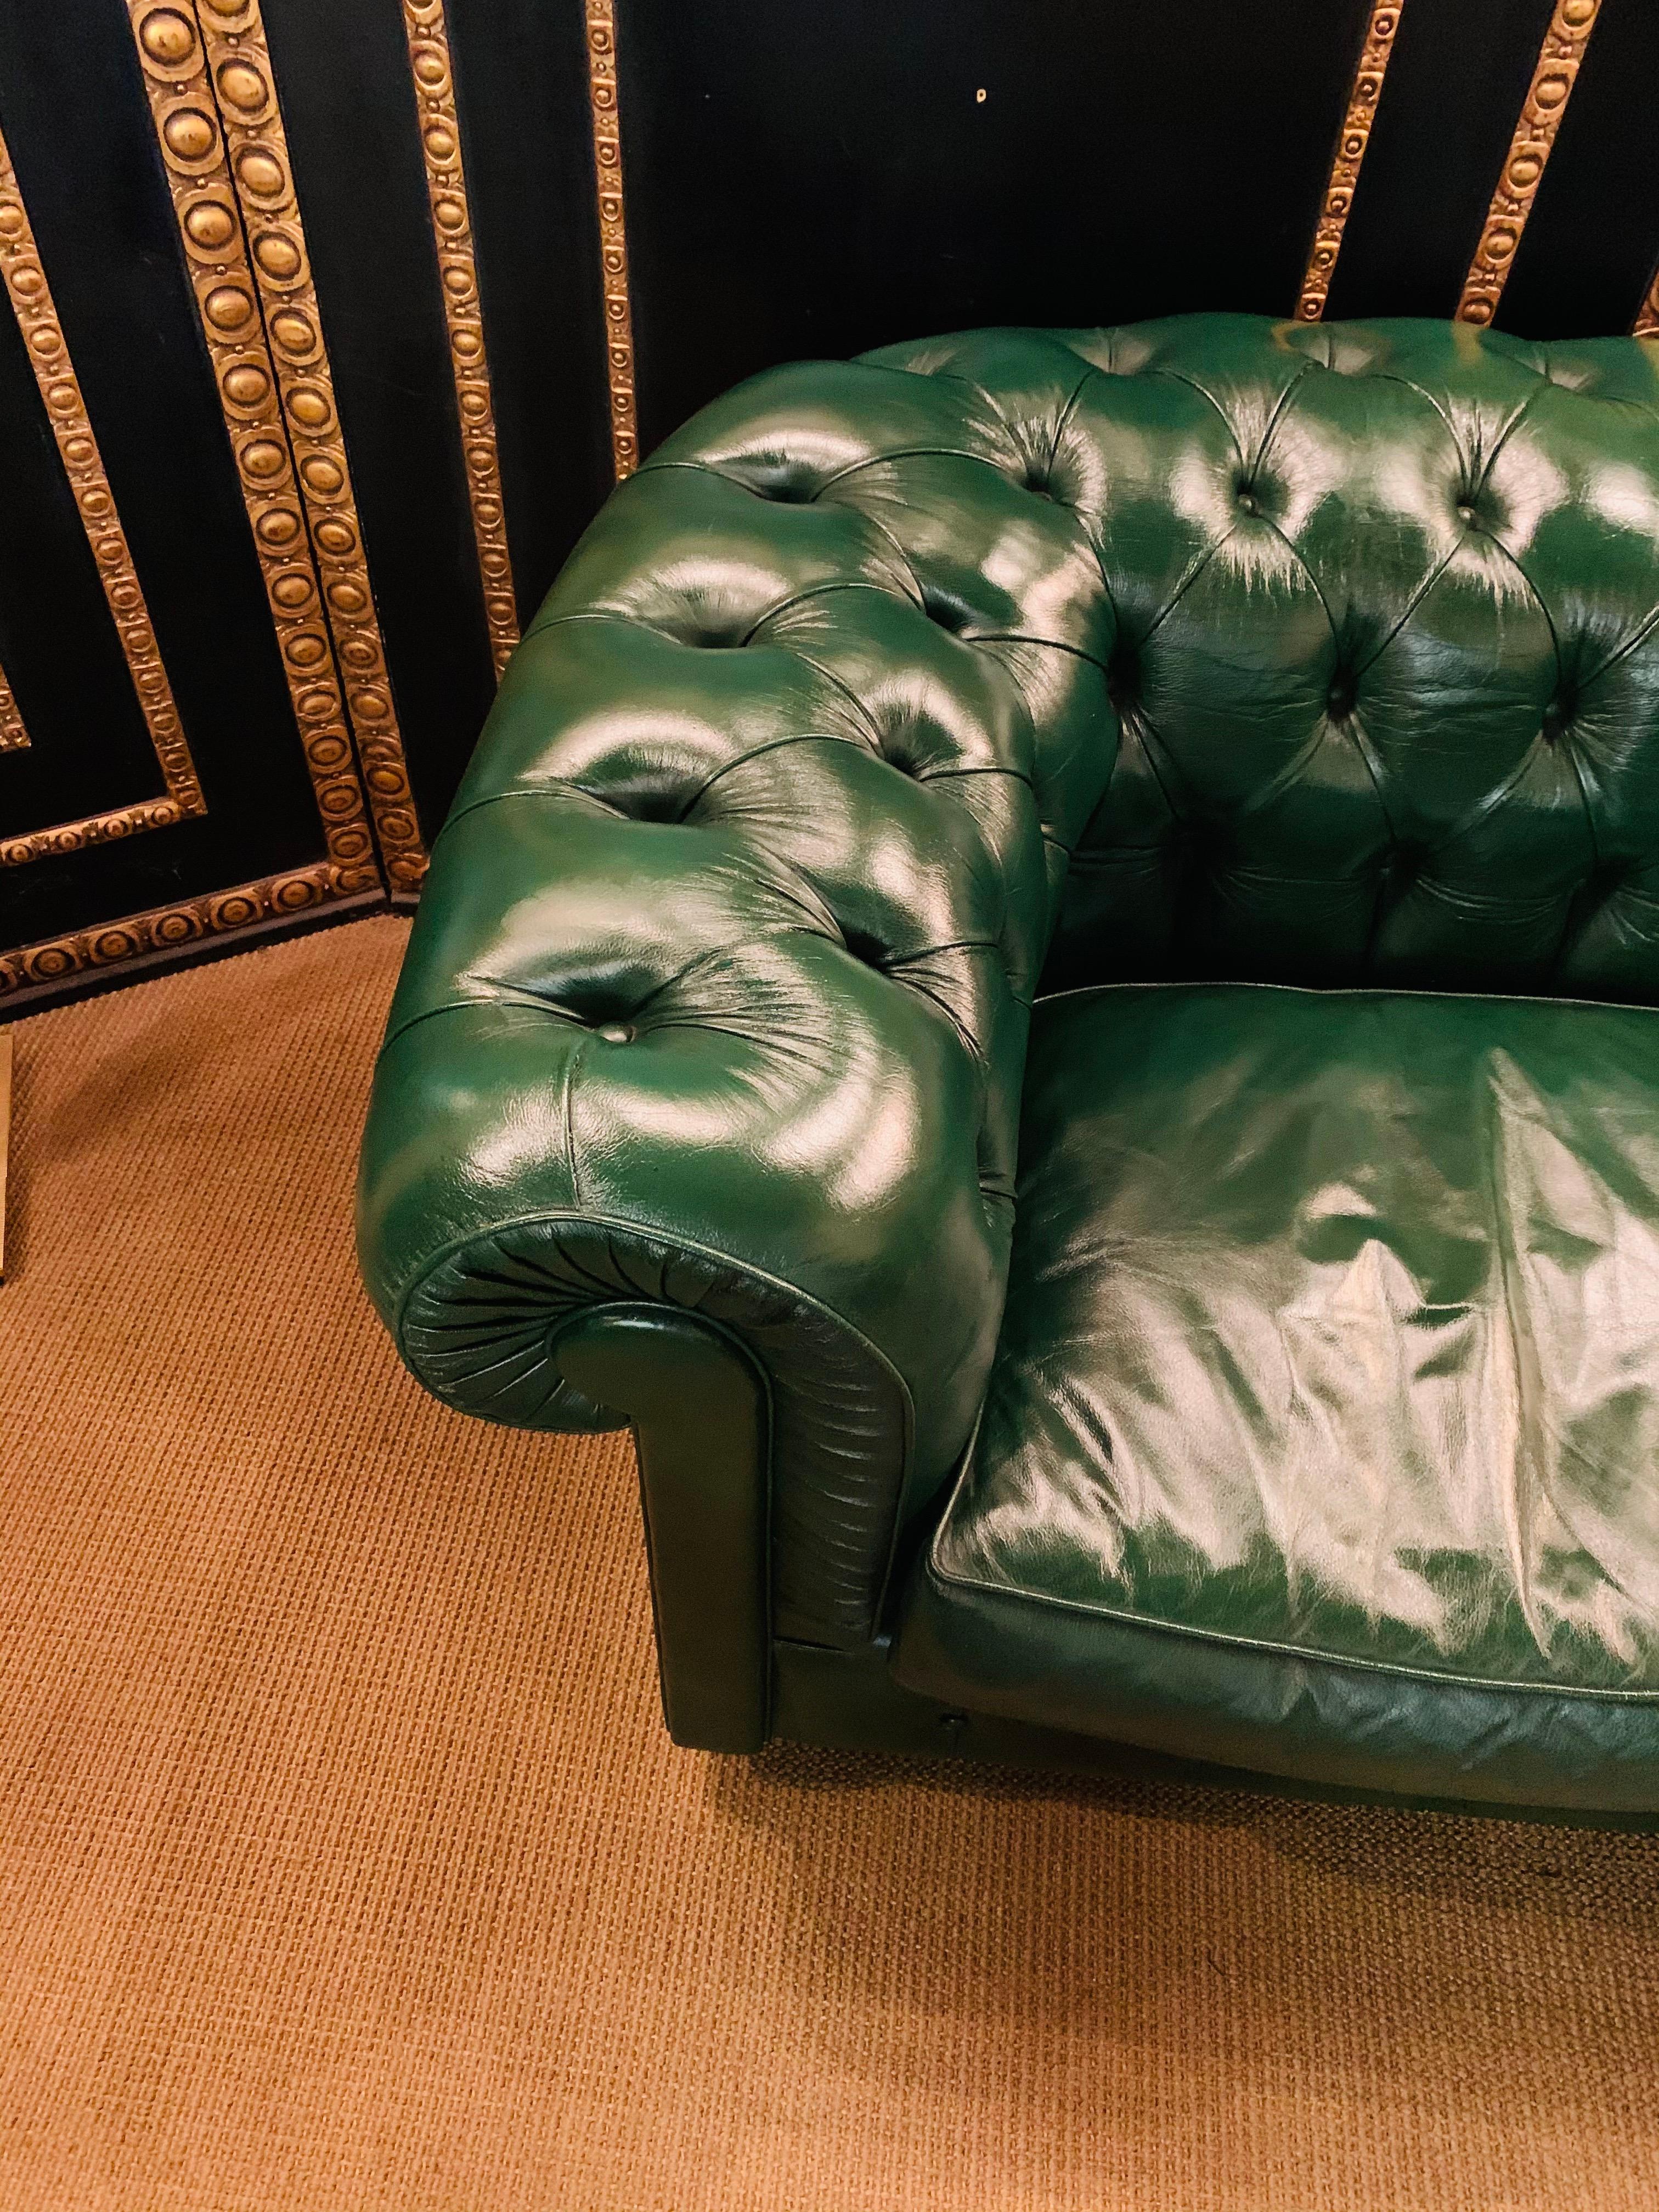 English Green Leather Chesterfield Club Suite Armchair and Sofa from Chateau d'ax